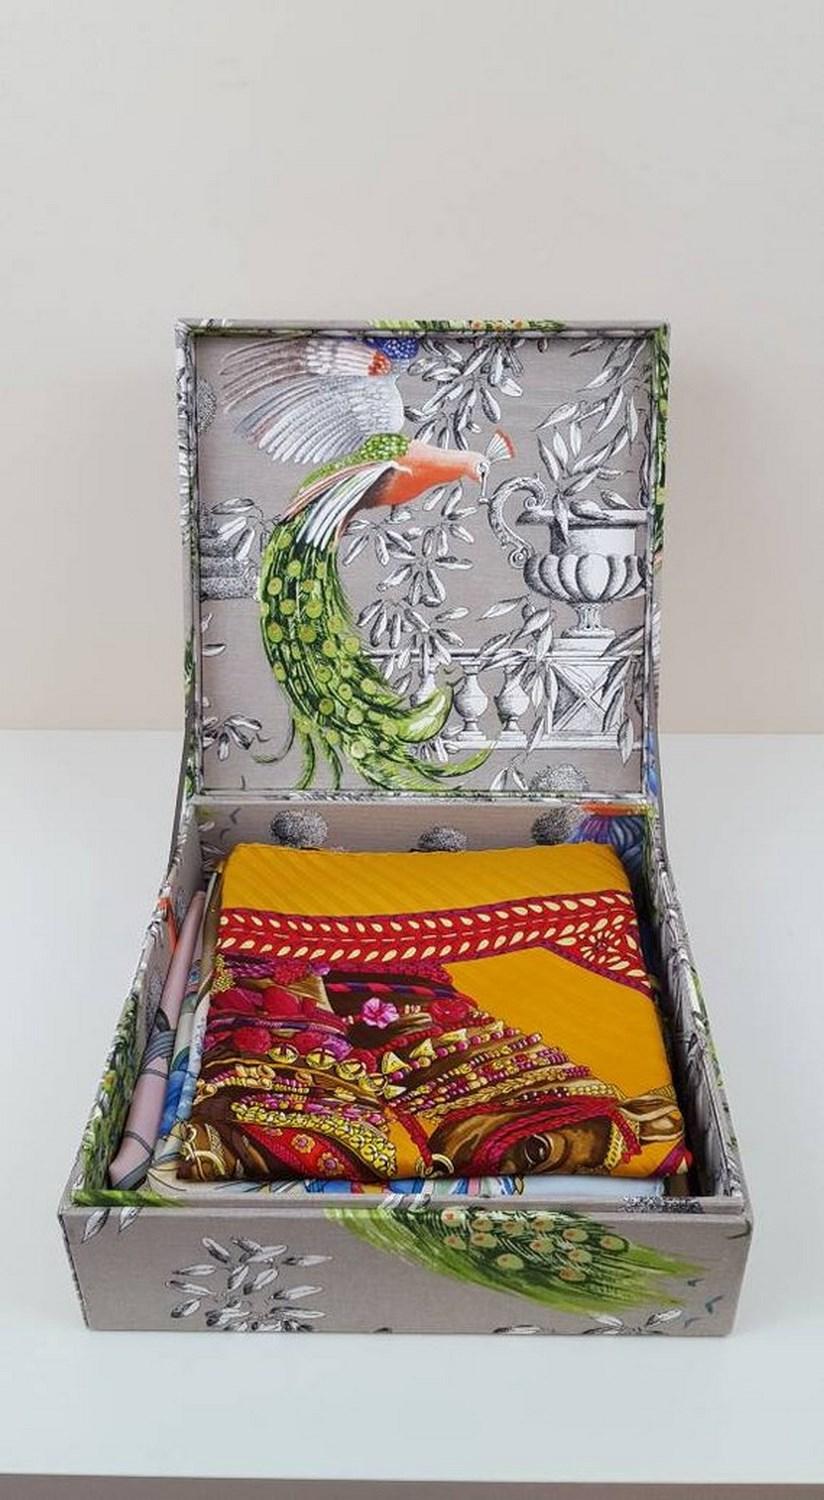 Birds Printed Fabric Decorative Storage Box for Scarves Handmade in France 4